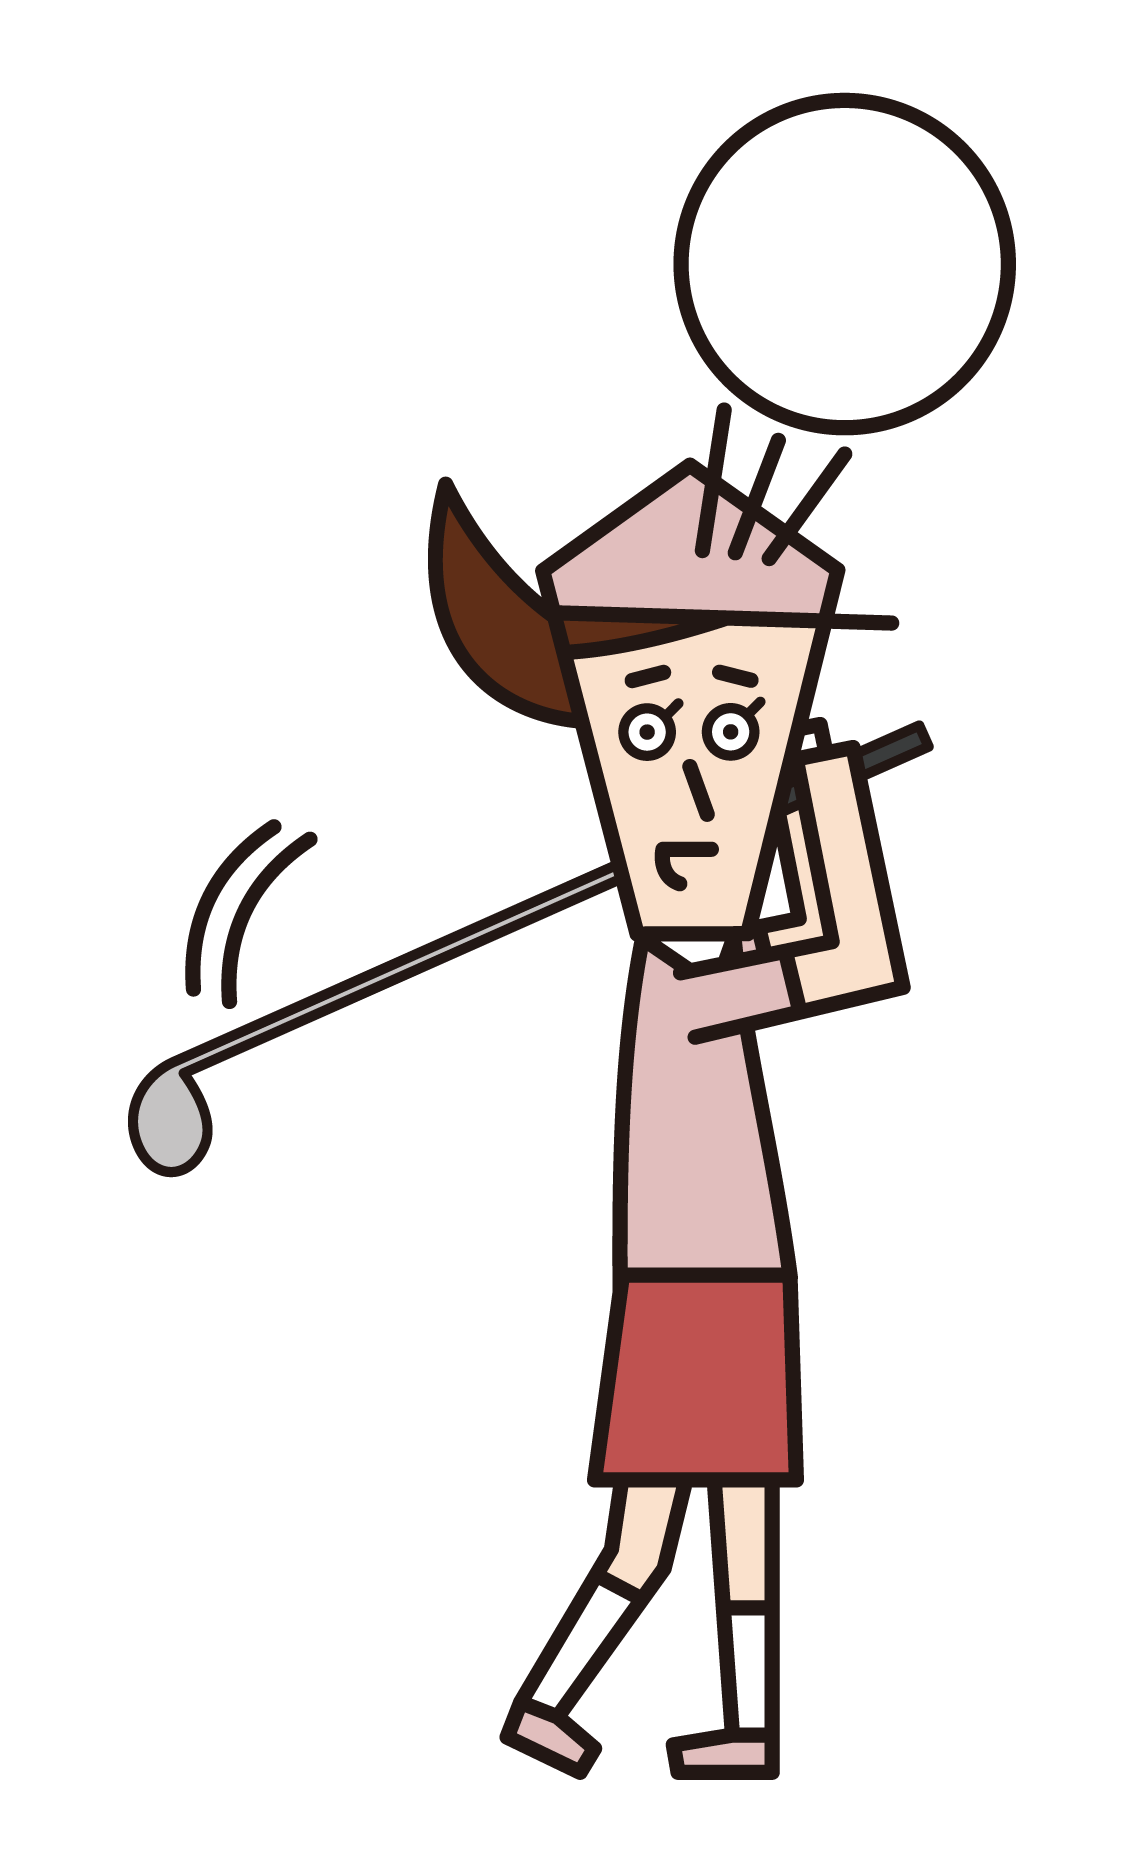 Illustration of a woman swinging in golf